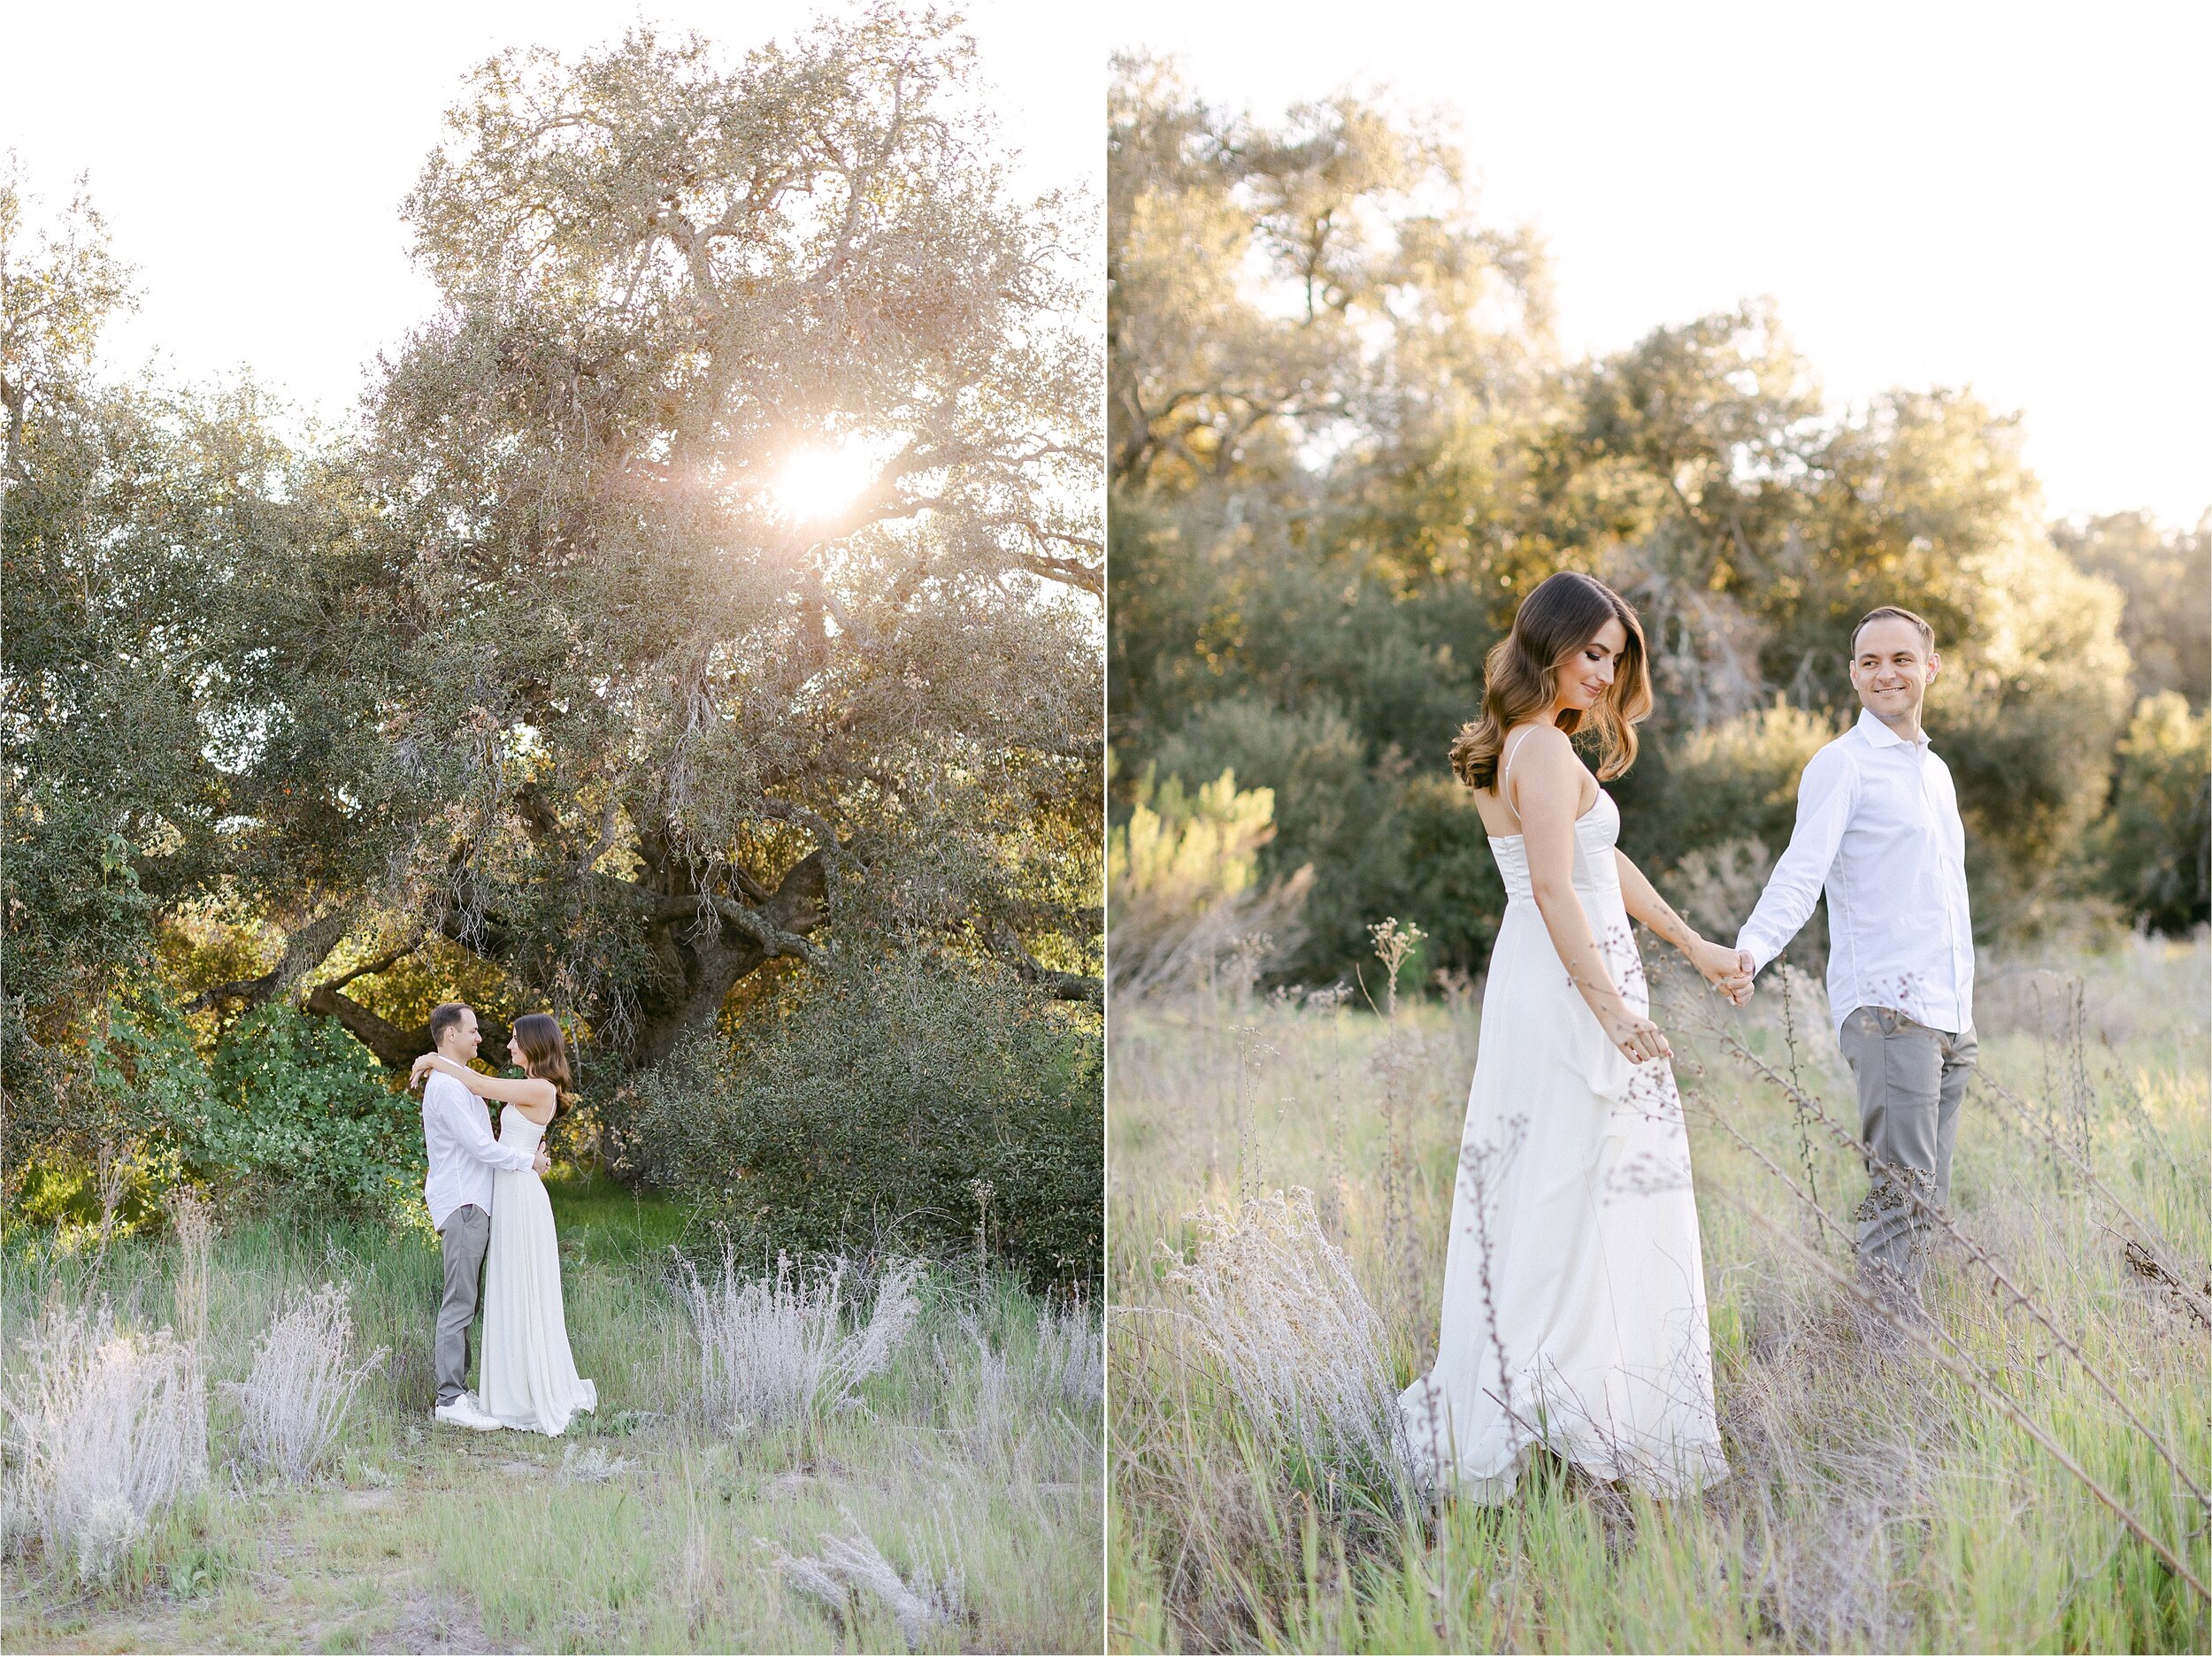 Man wearing white button down and grey pants, holds his fiance's hand and leads her Thomas Riley Wilderness Park during thier Orange County engagement photos